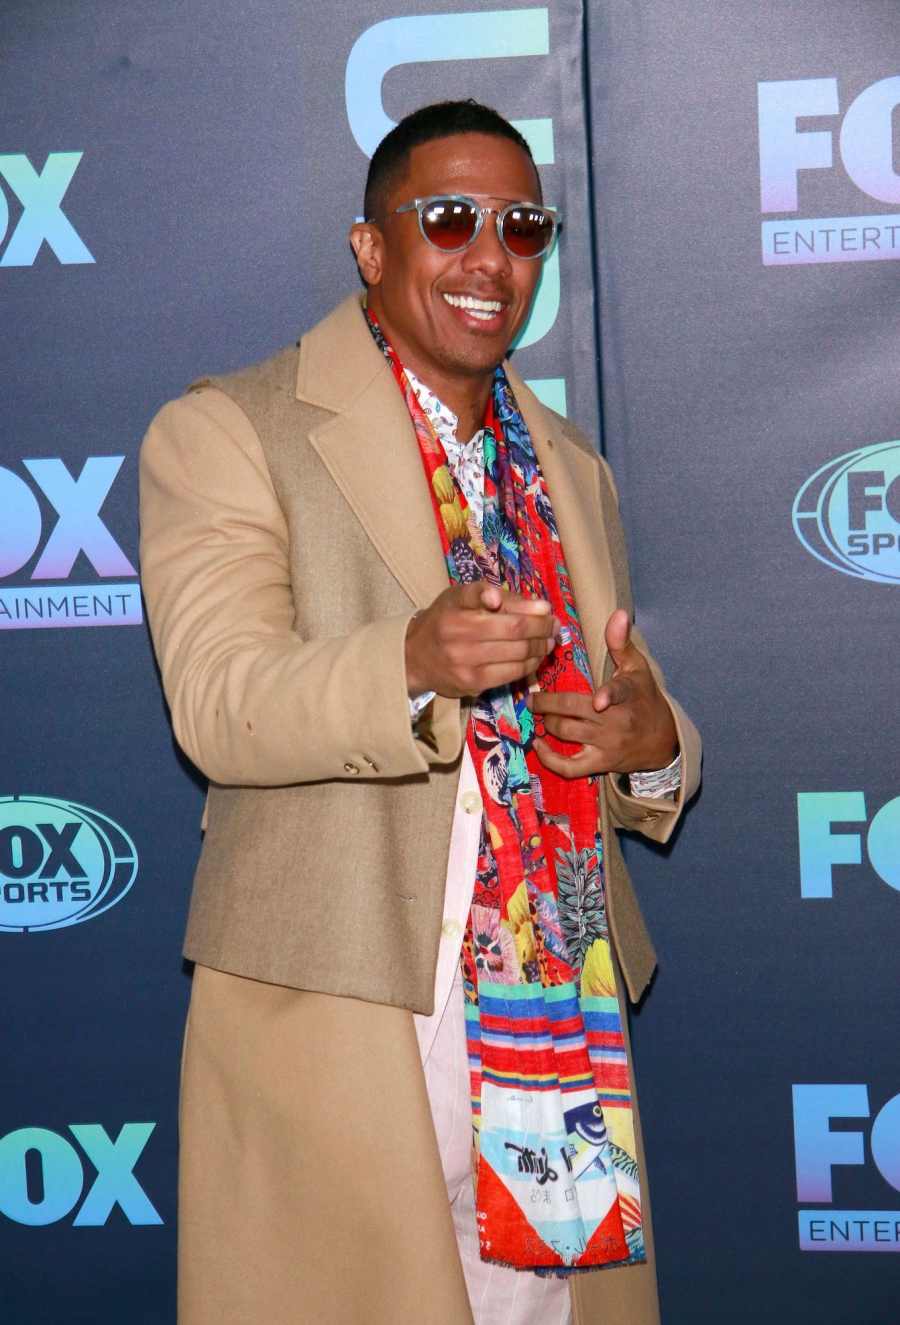 Nick Cannon's Babies Are ‘Planned’: There’s a ‘Thought Process Going in’